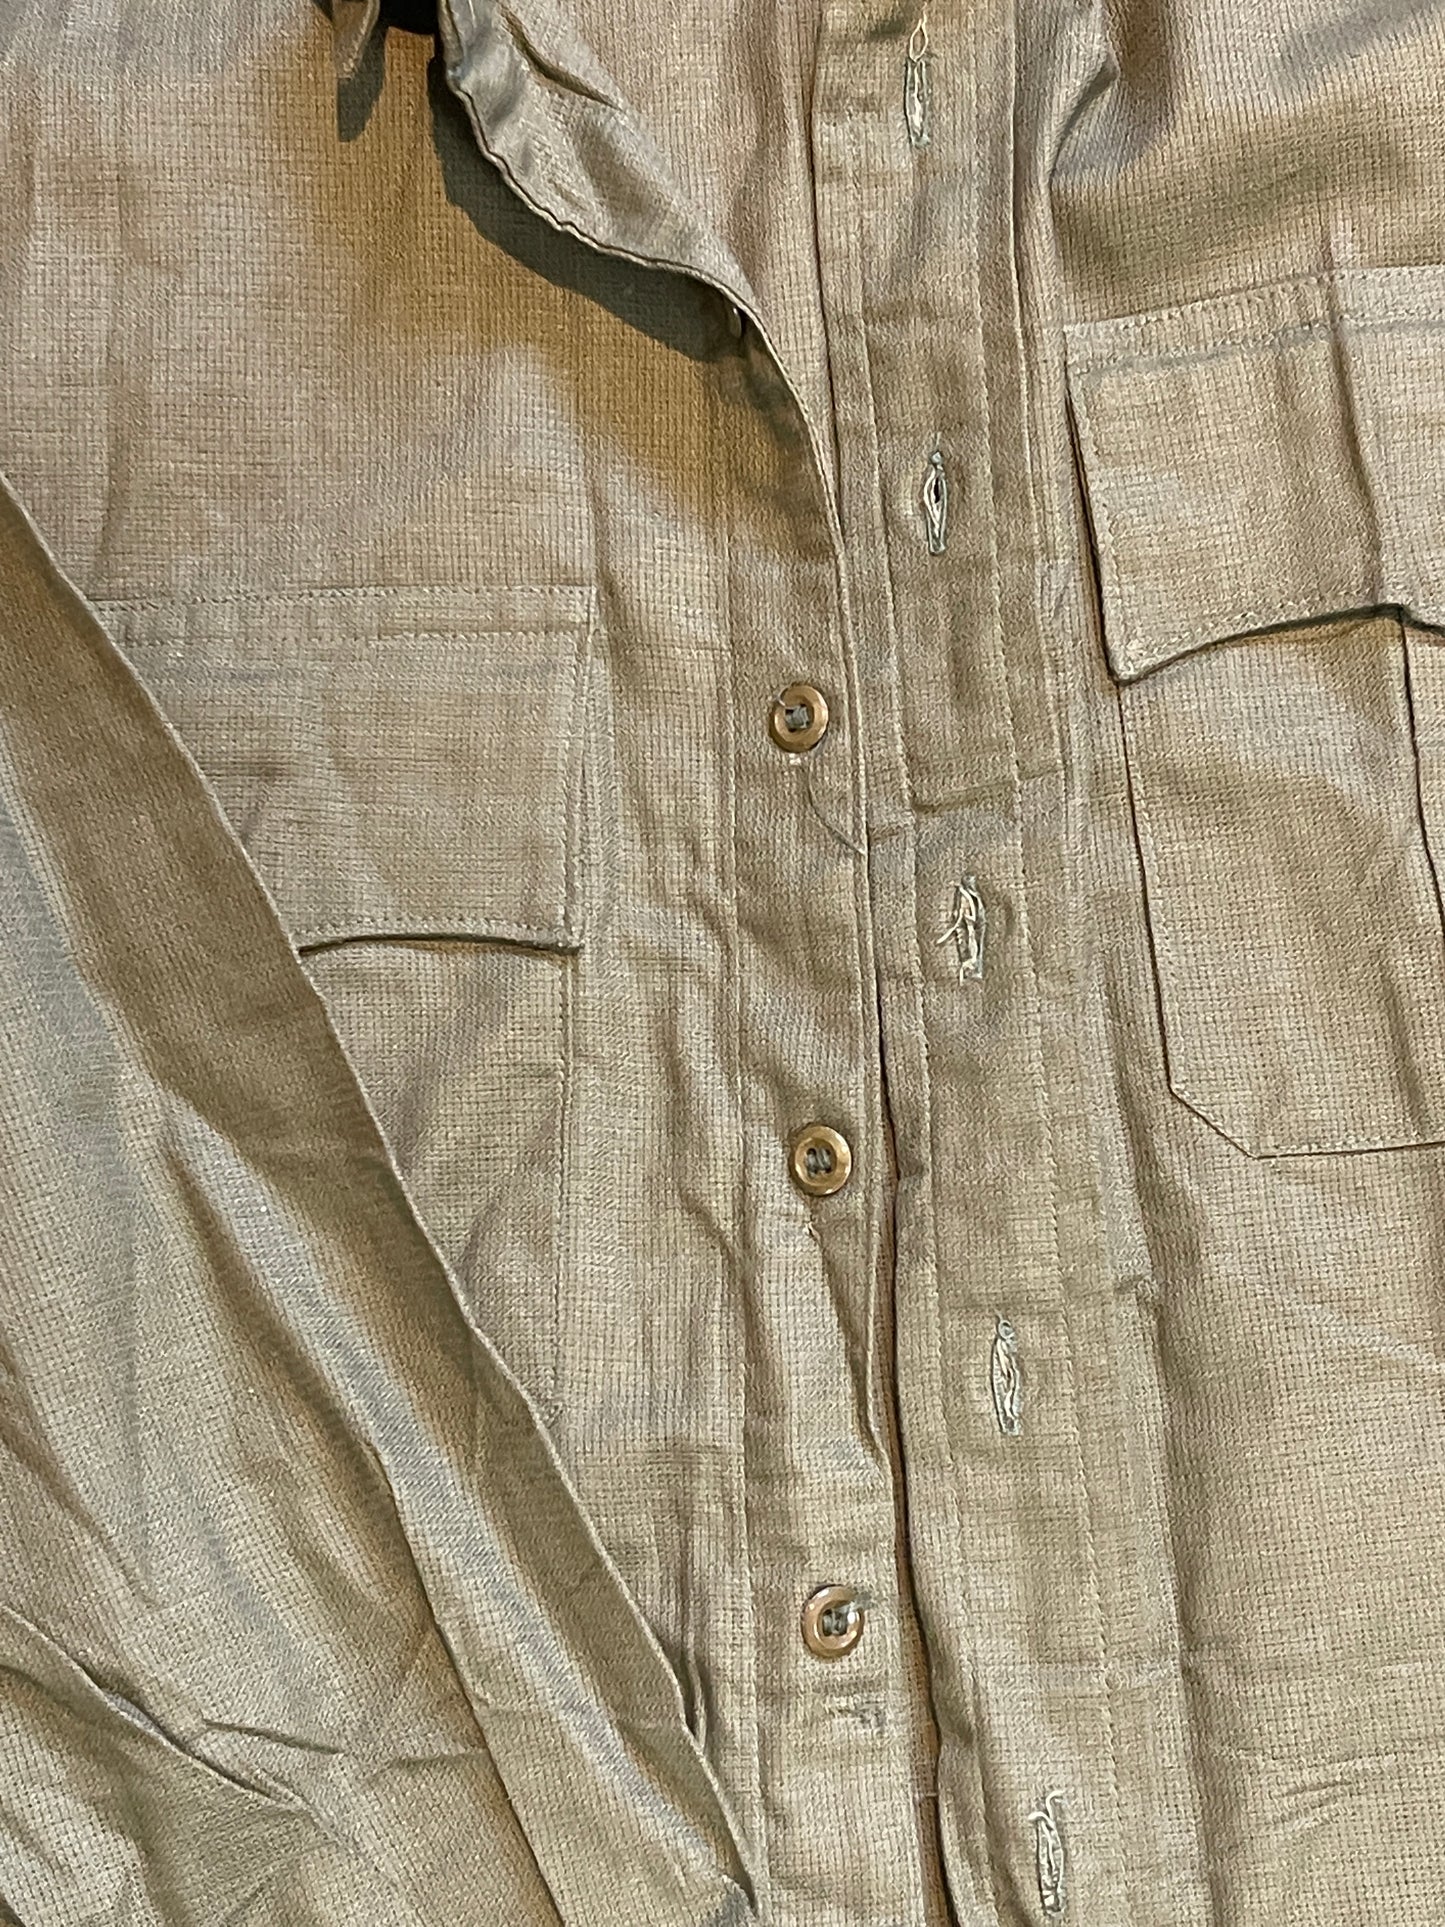 1966 Dated British Army Jungle Green Shirt front image